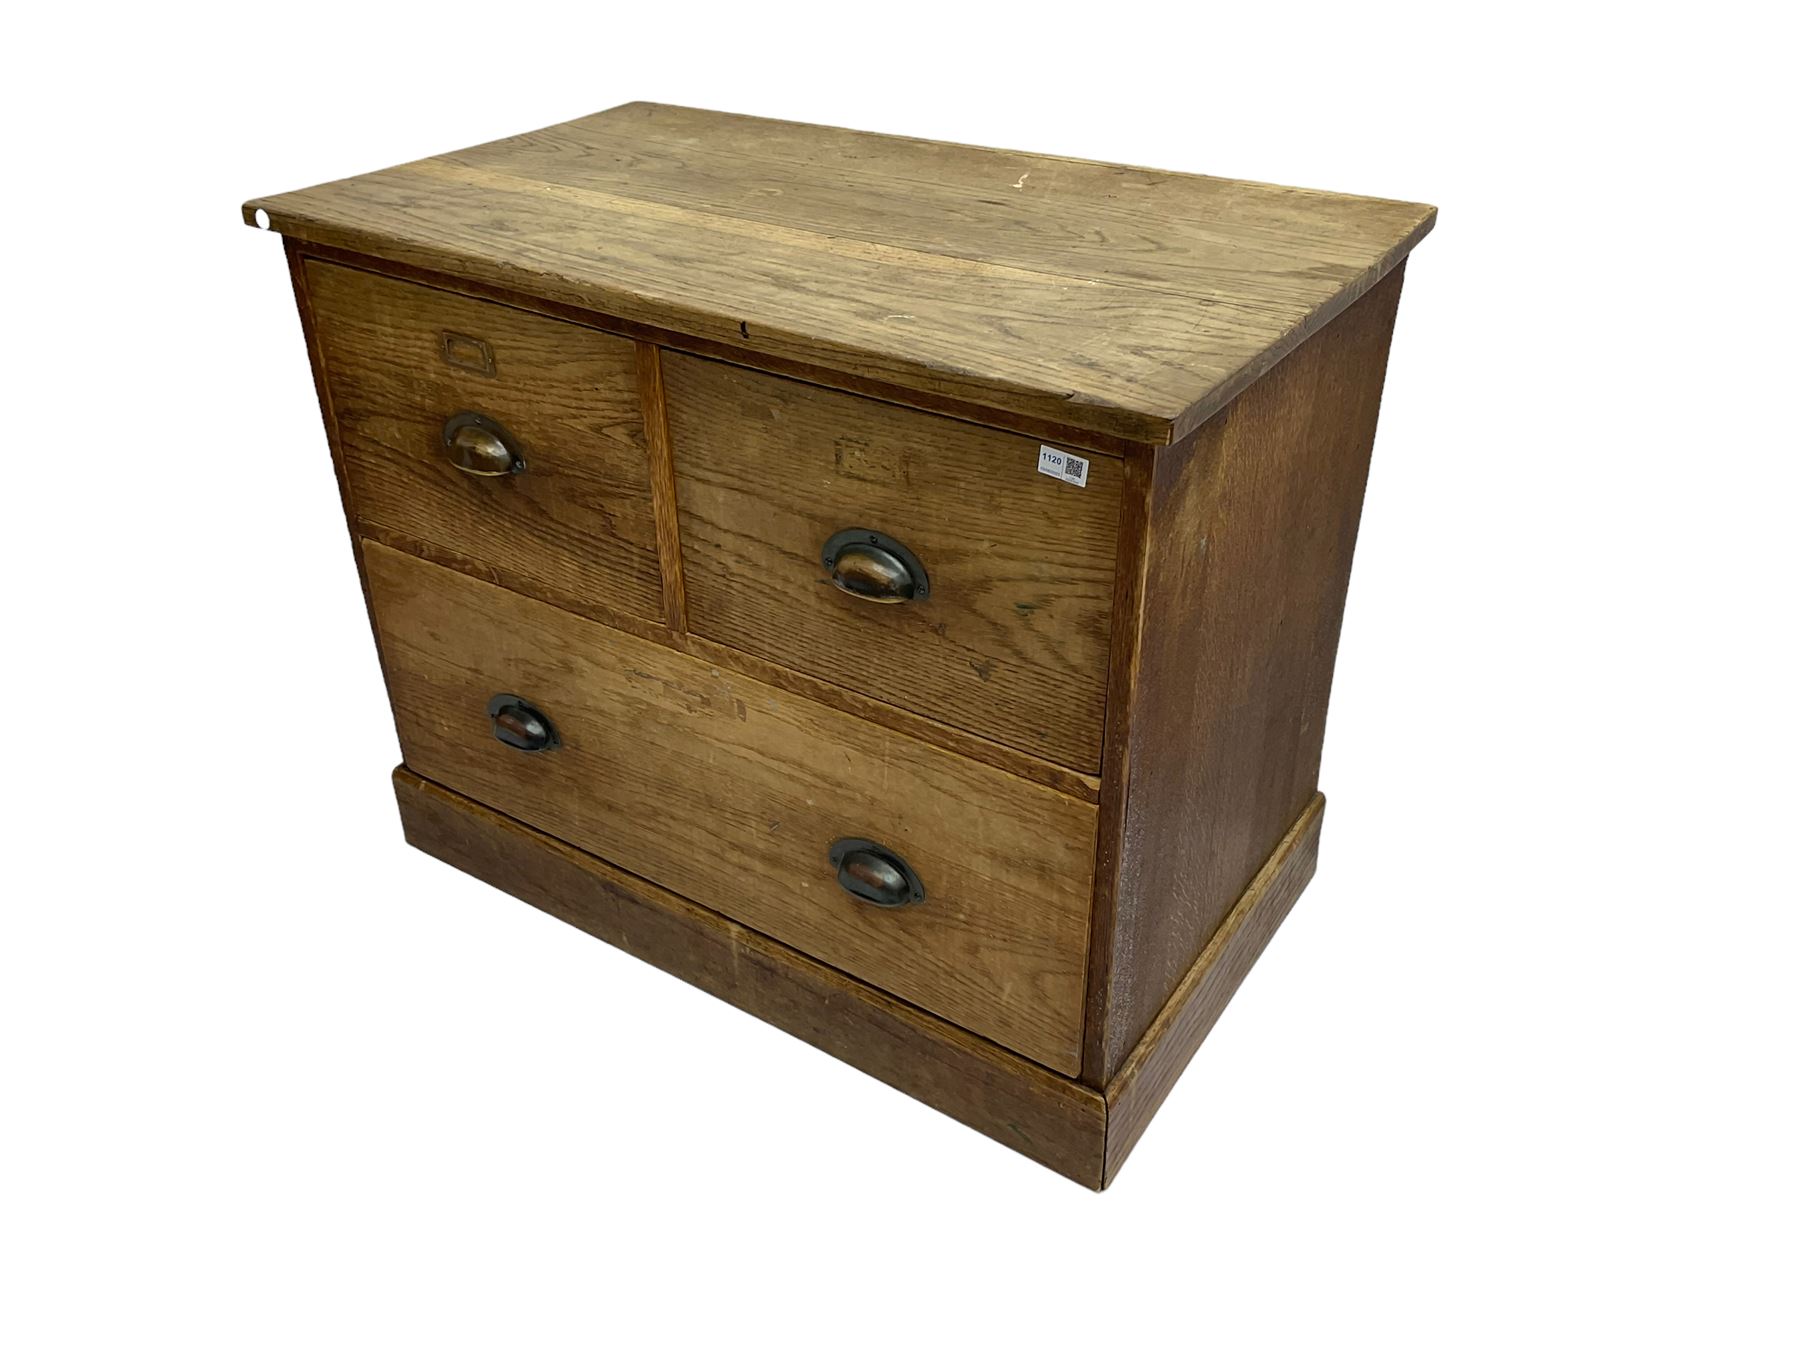 Early to mid-20th century oak chest - Image 6 of 7